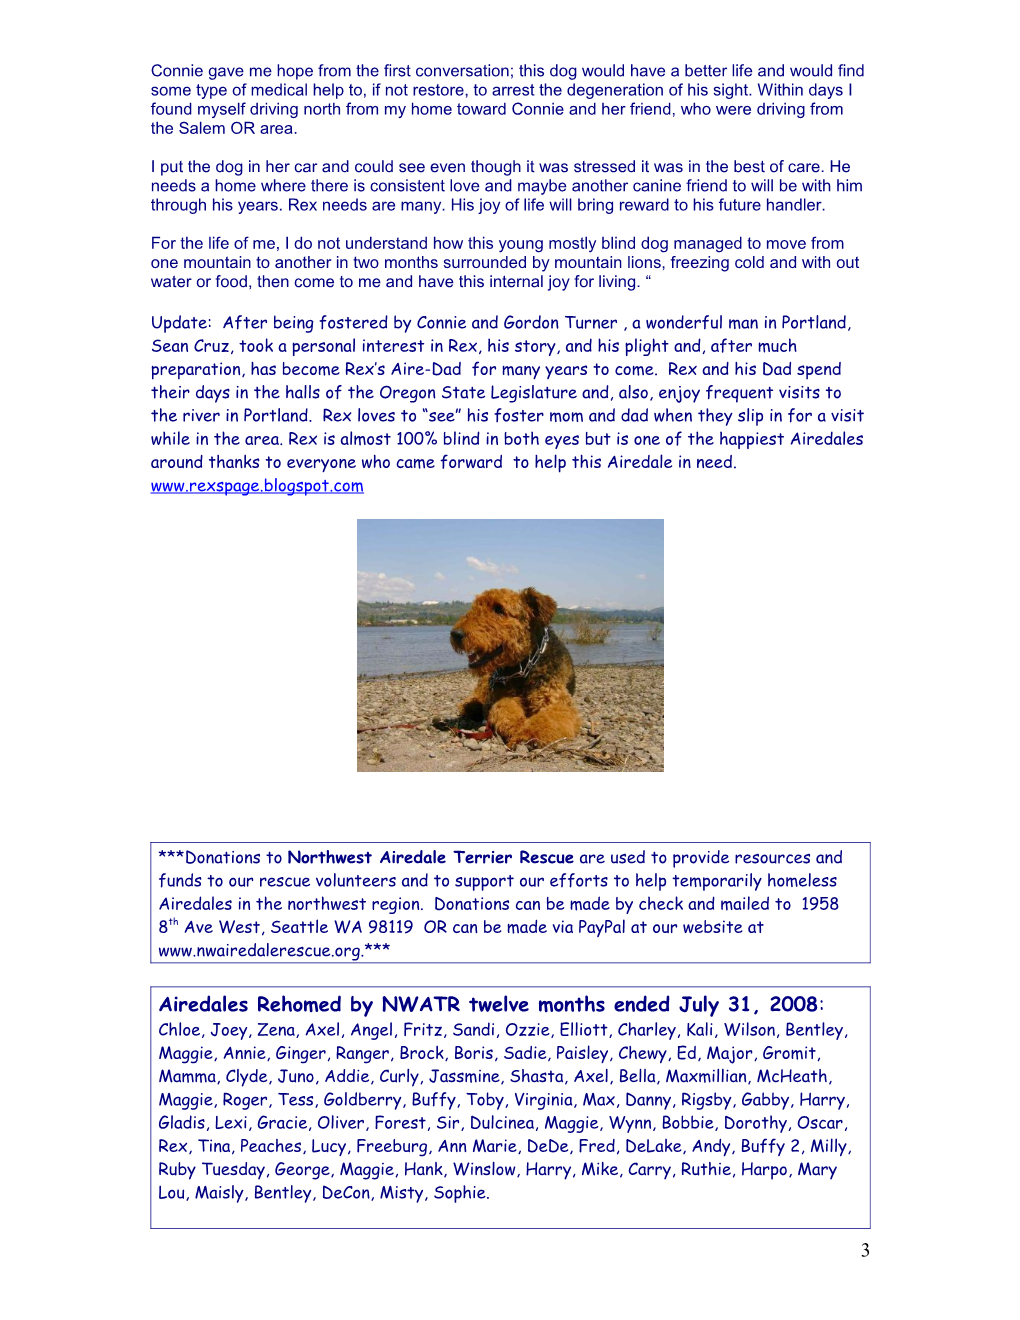 Airedale Rescue Stories